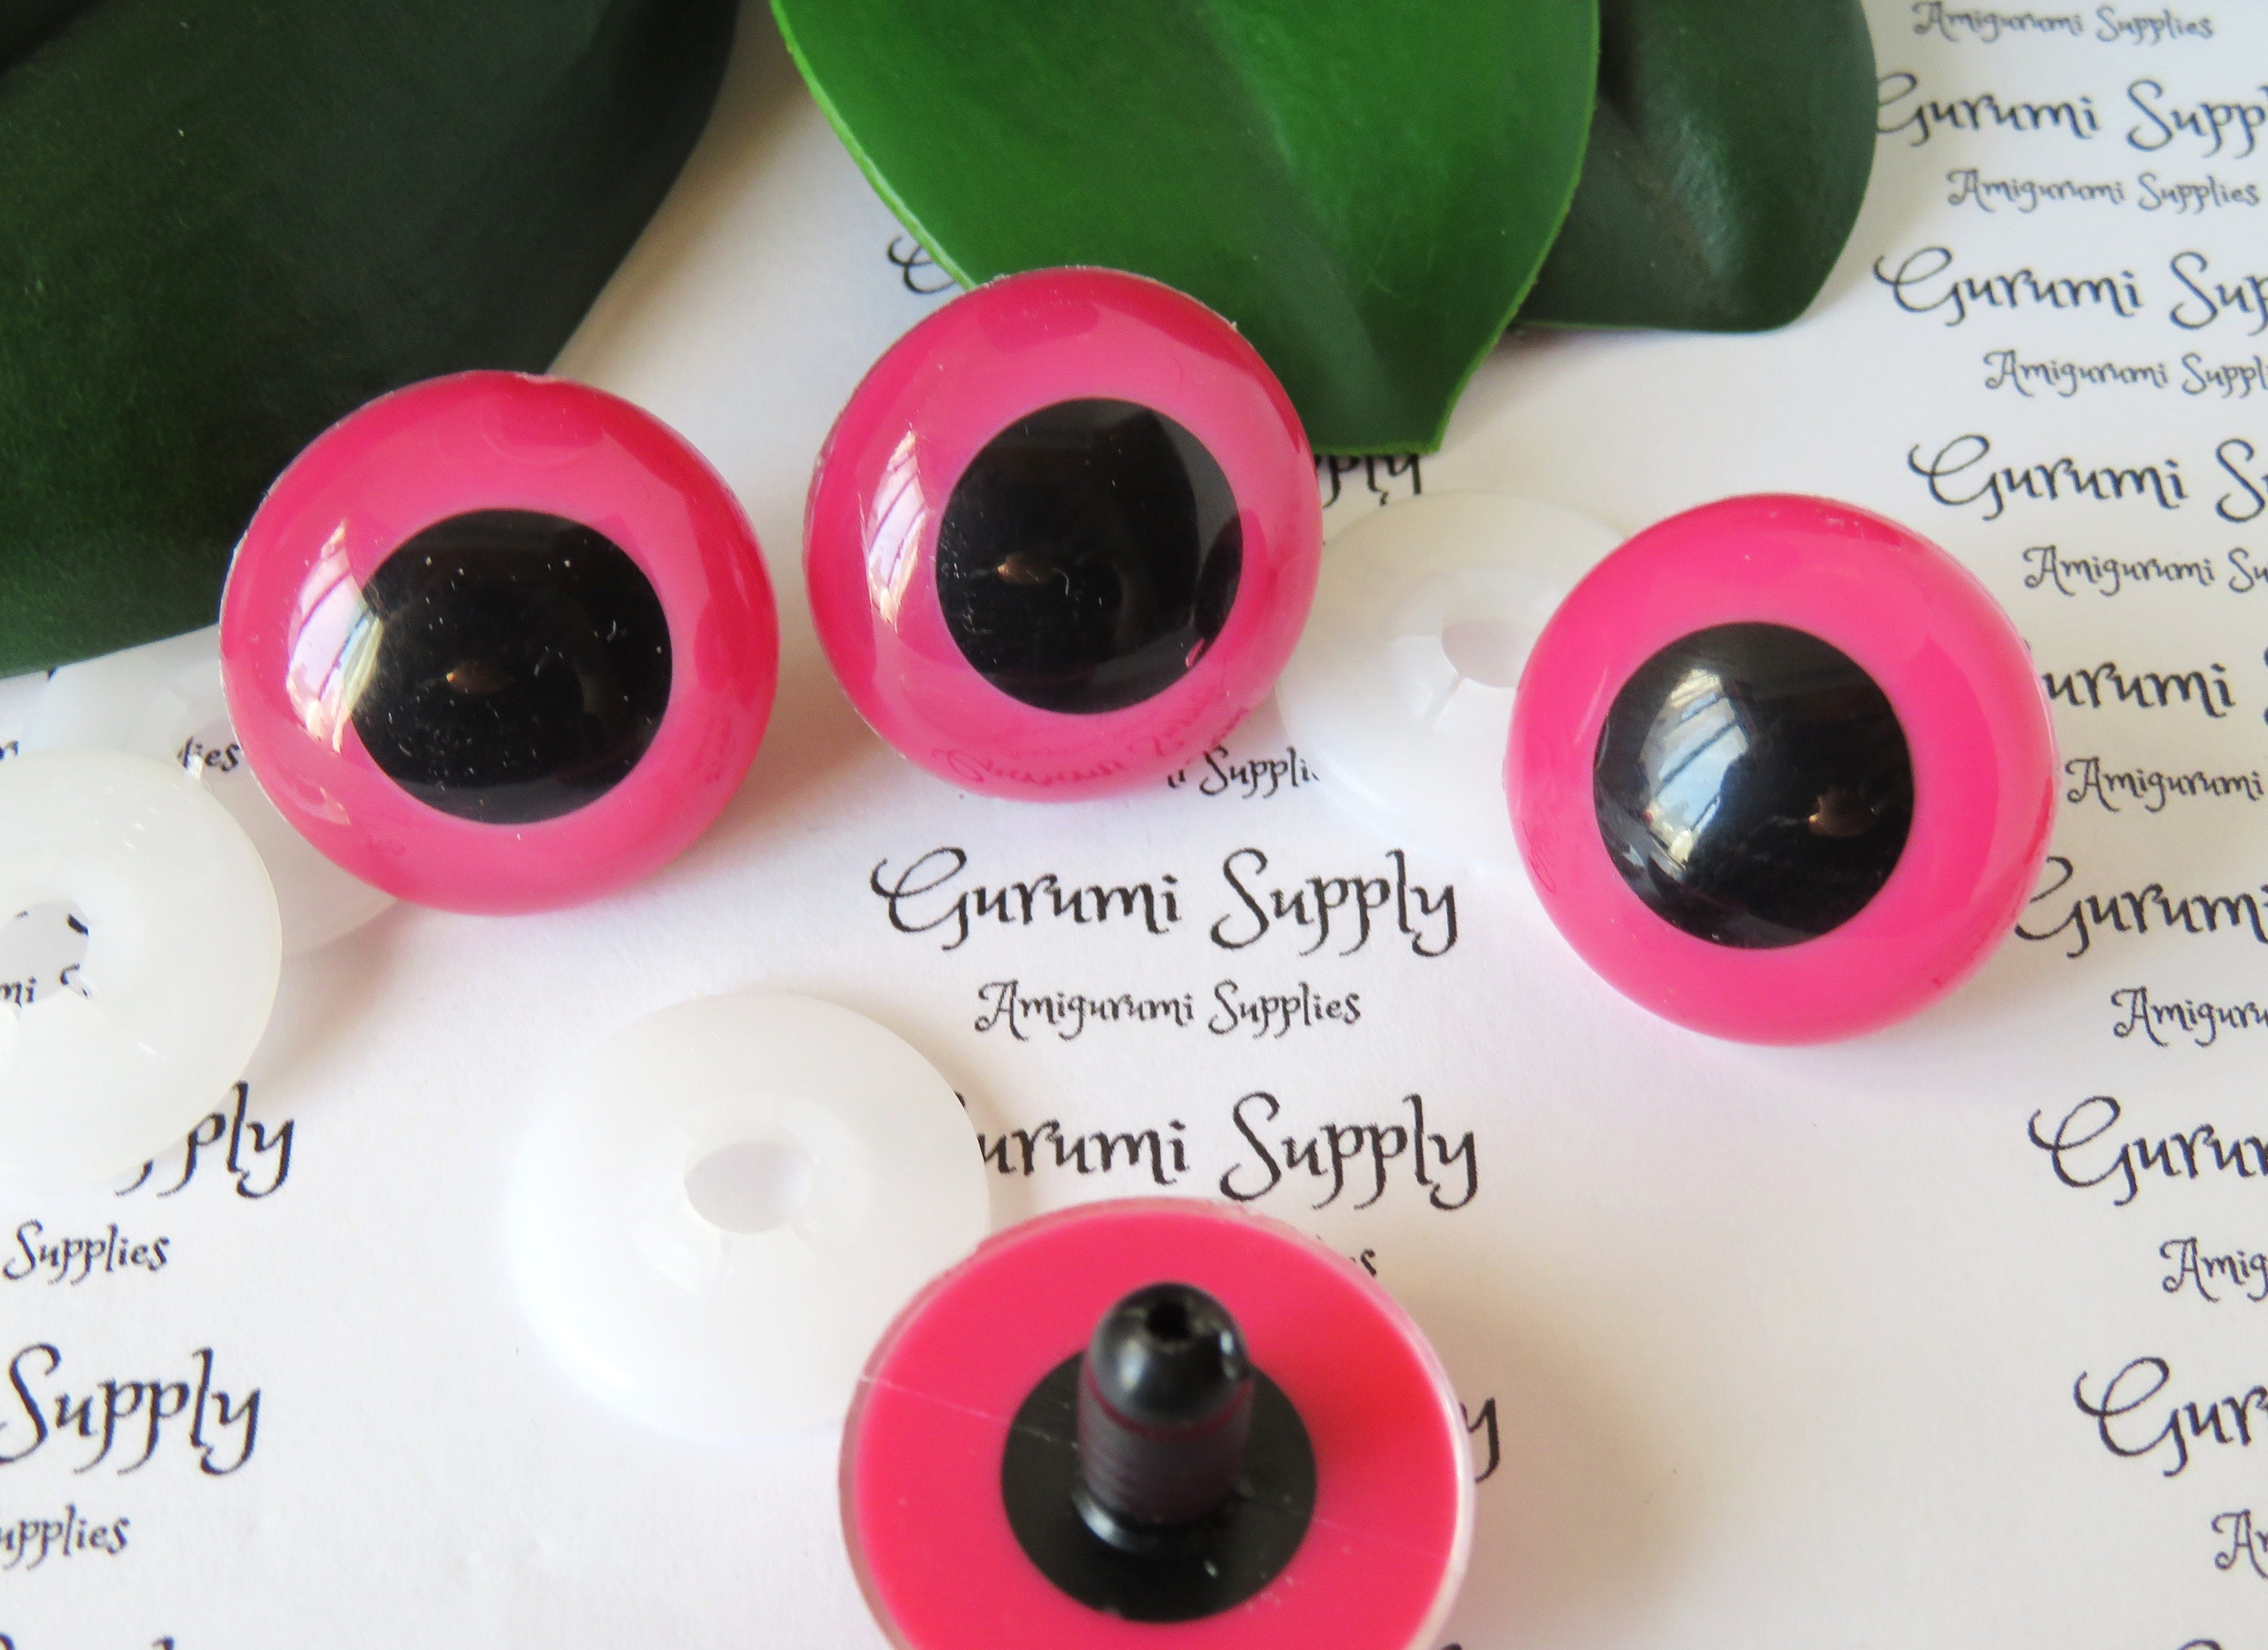 16mm x 20mm Toy Safety Eyes Dollmaking Oval Black and White Eyes with  Washers: 2 Pairs - Character / Comic / Amigurumi / Animal / Toy Craft